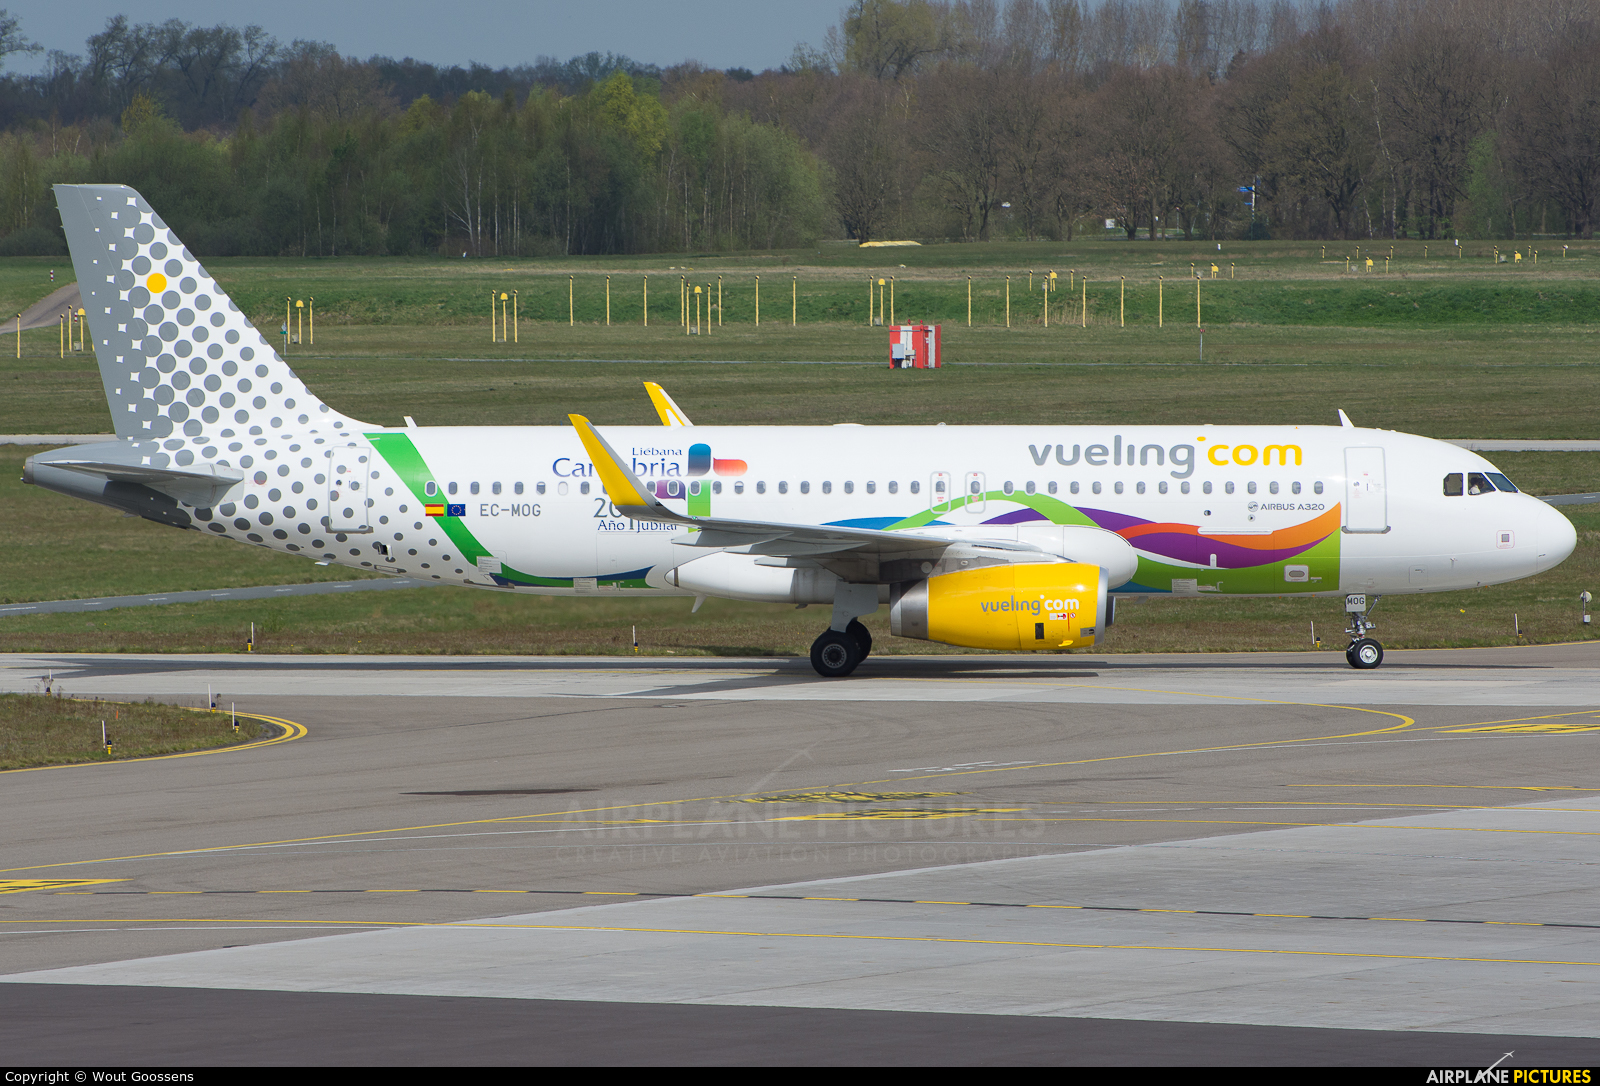 Vueling Airlines EC-MOG aircraft at Eindhoven